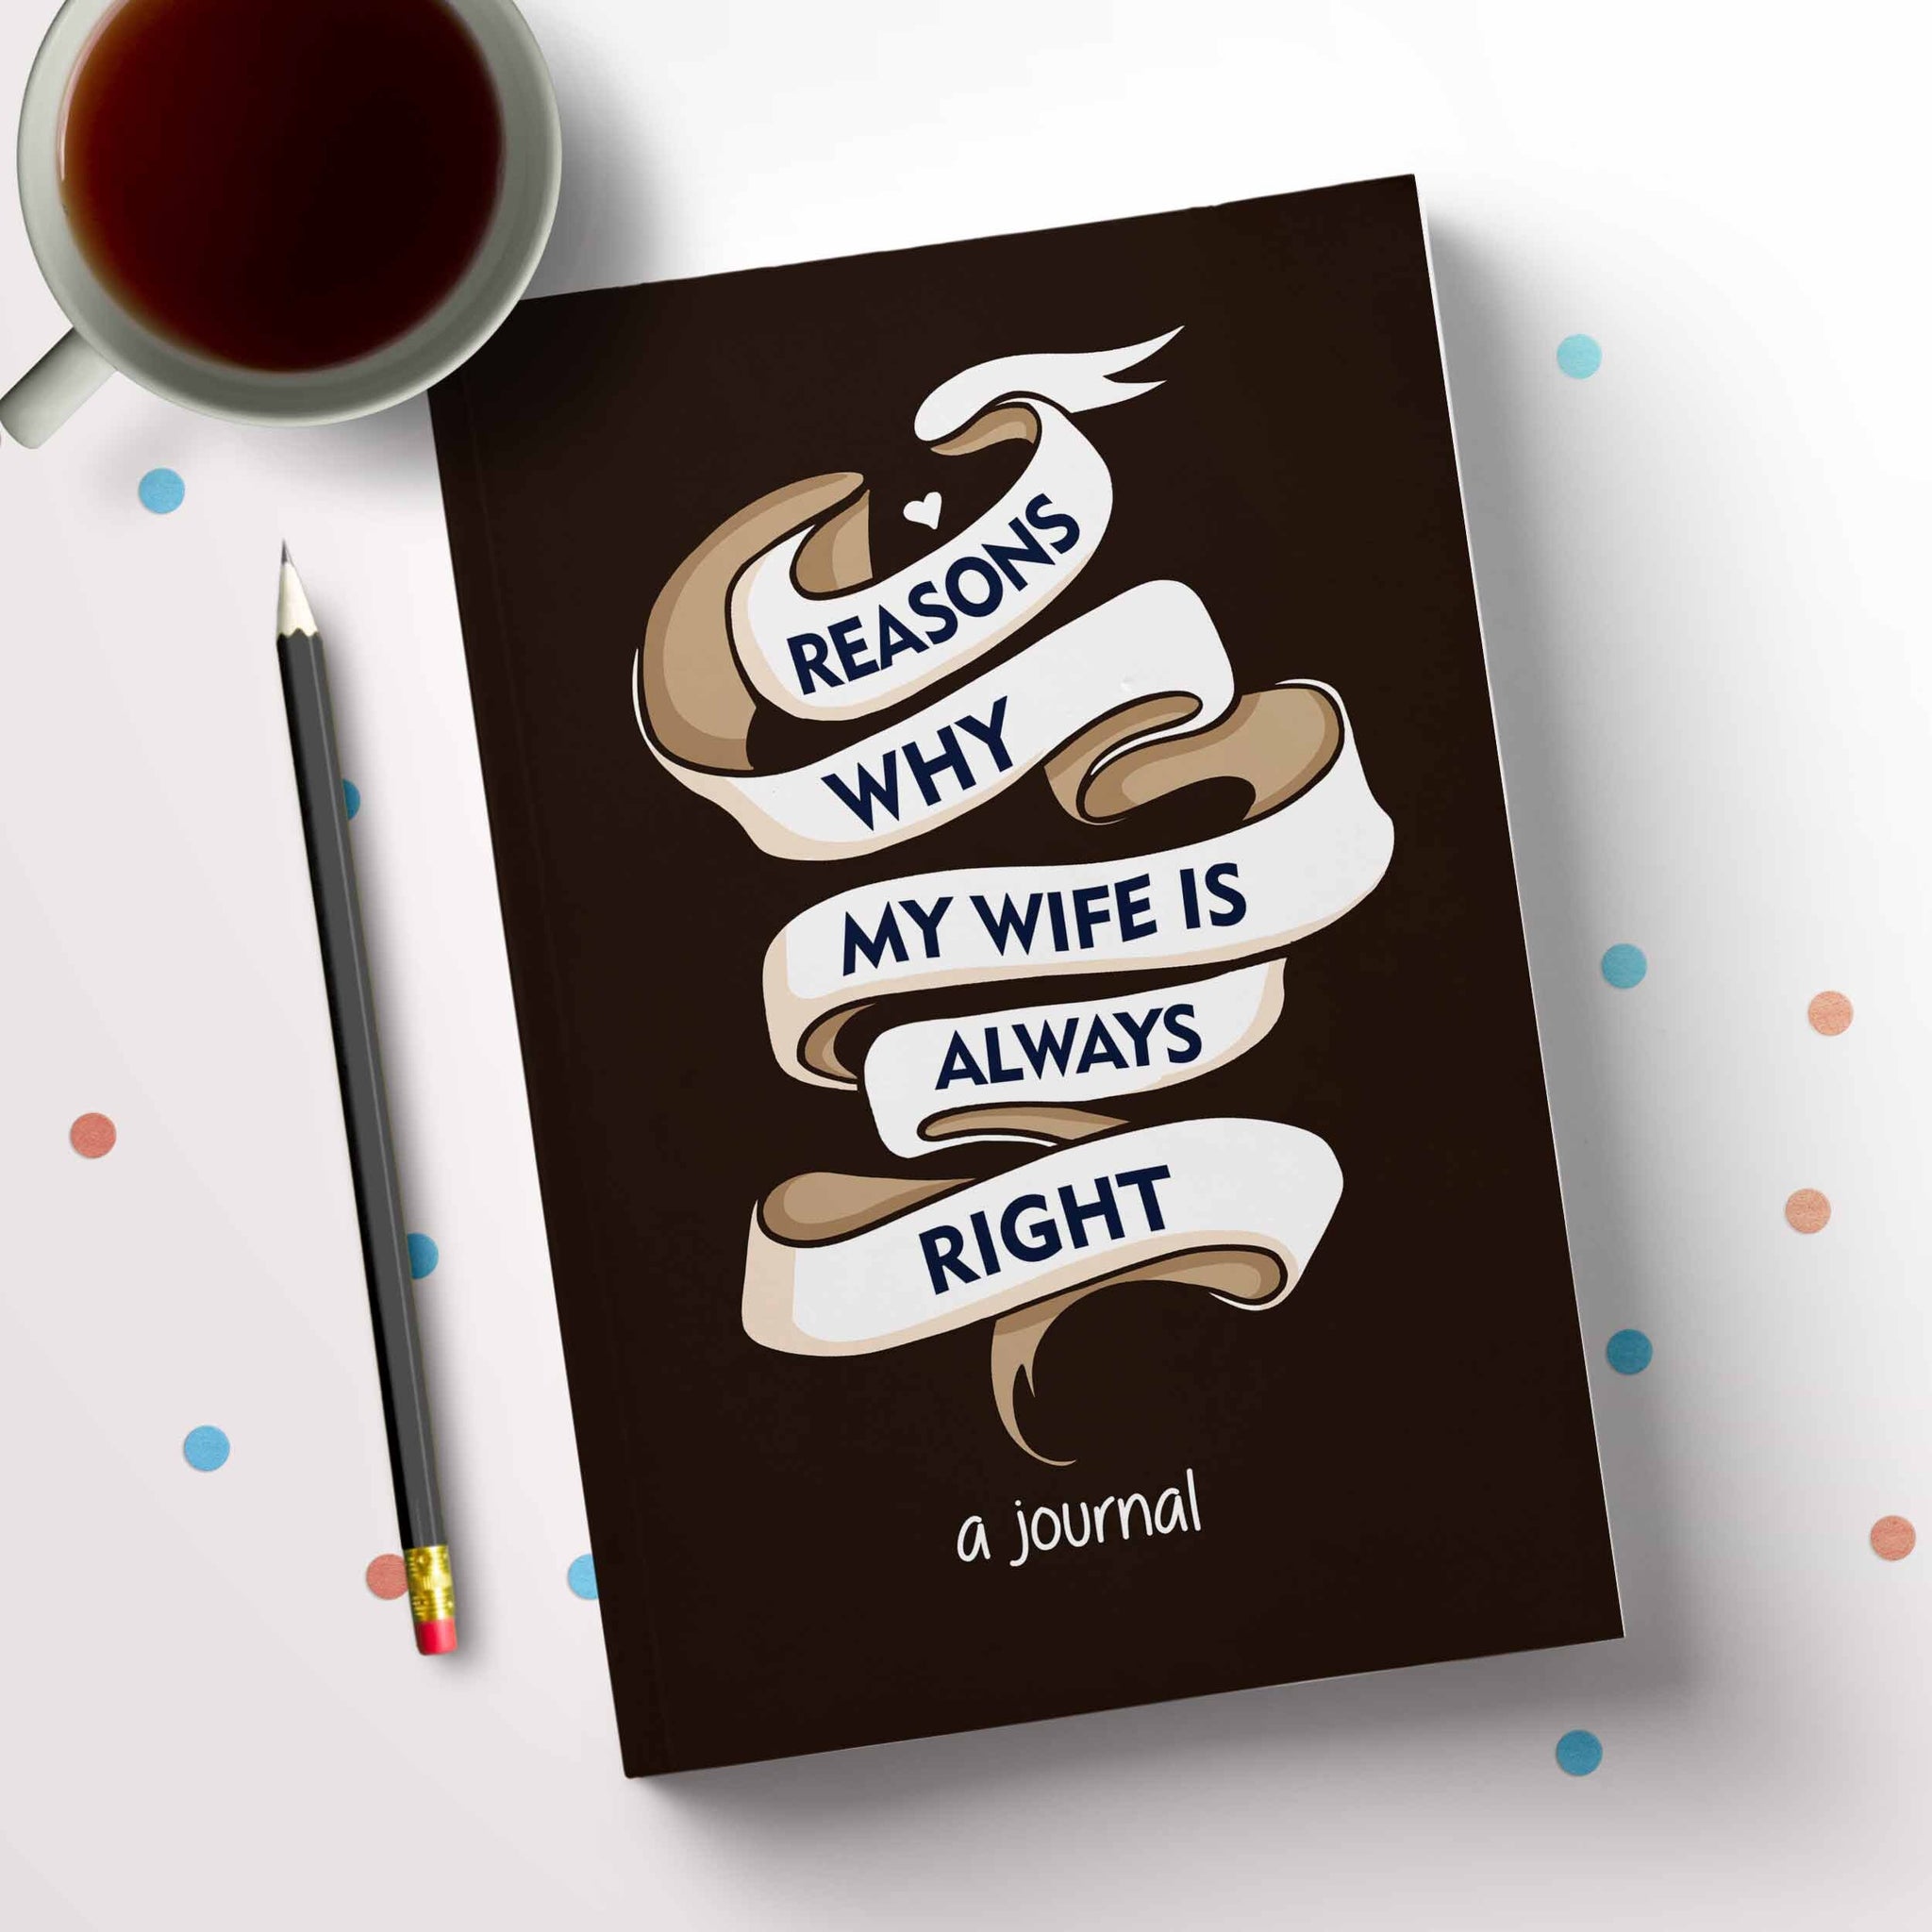 Funny Valentines Day Gift for Him | Journal Gag Gift for Men, by BootsTees